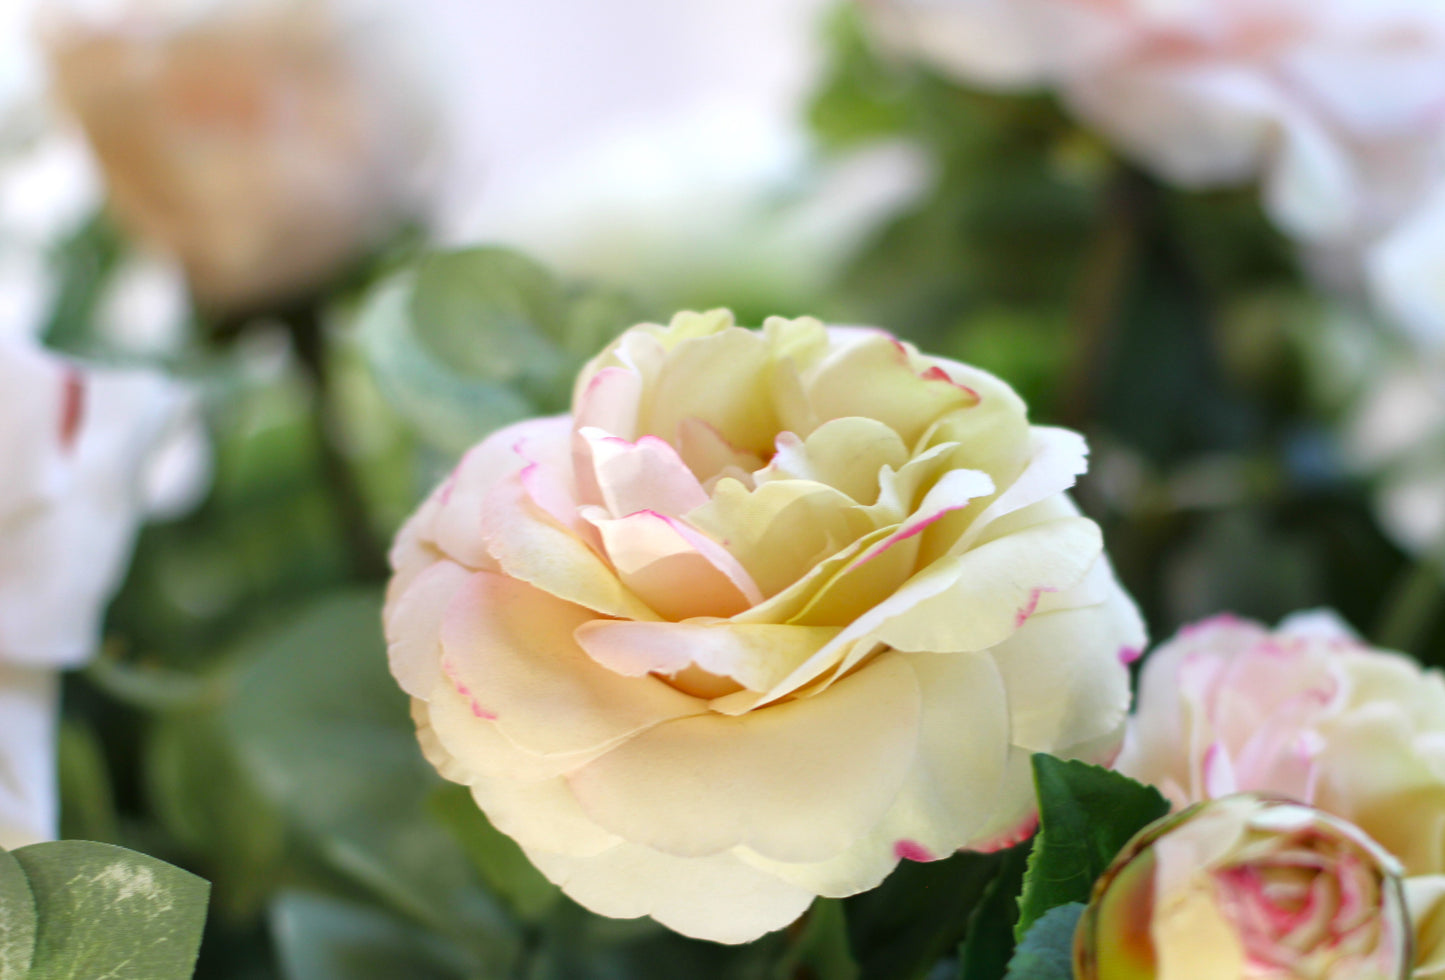 Close up of Camellia flower in a wedding floral urn